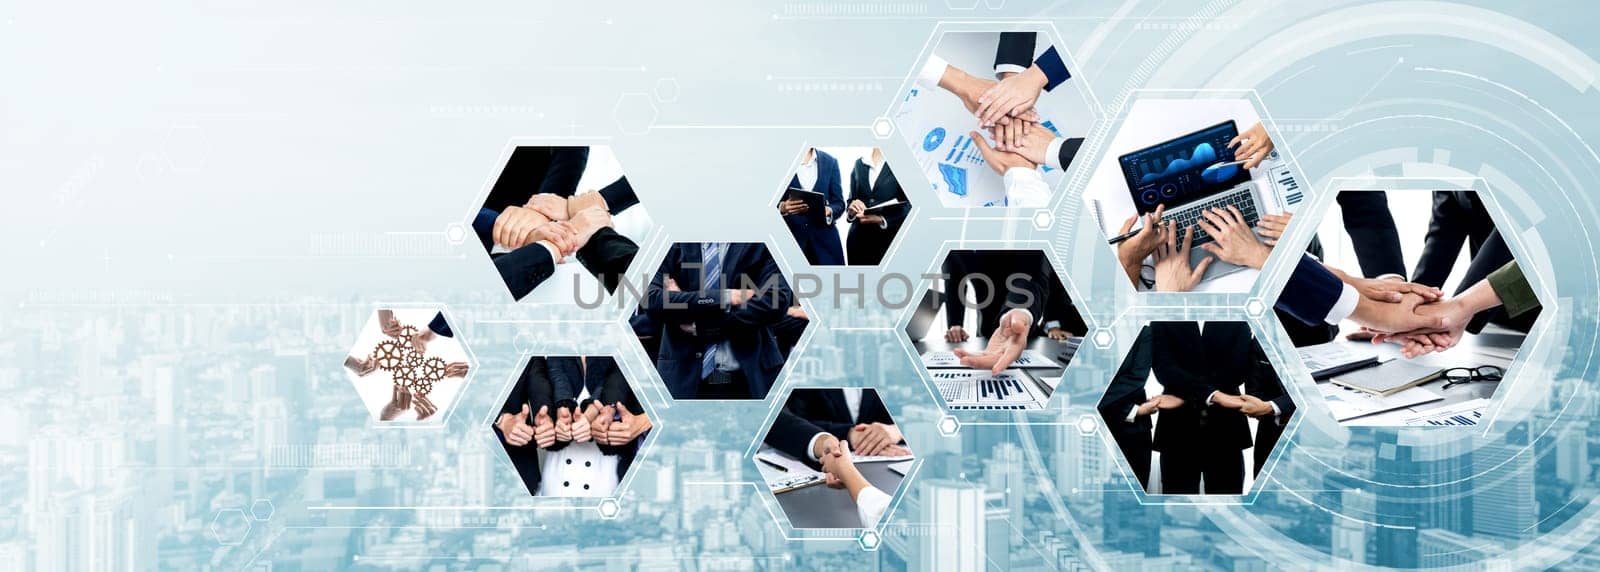 Teamwork and human resources HR management technology for business vexel by biancoblue